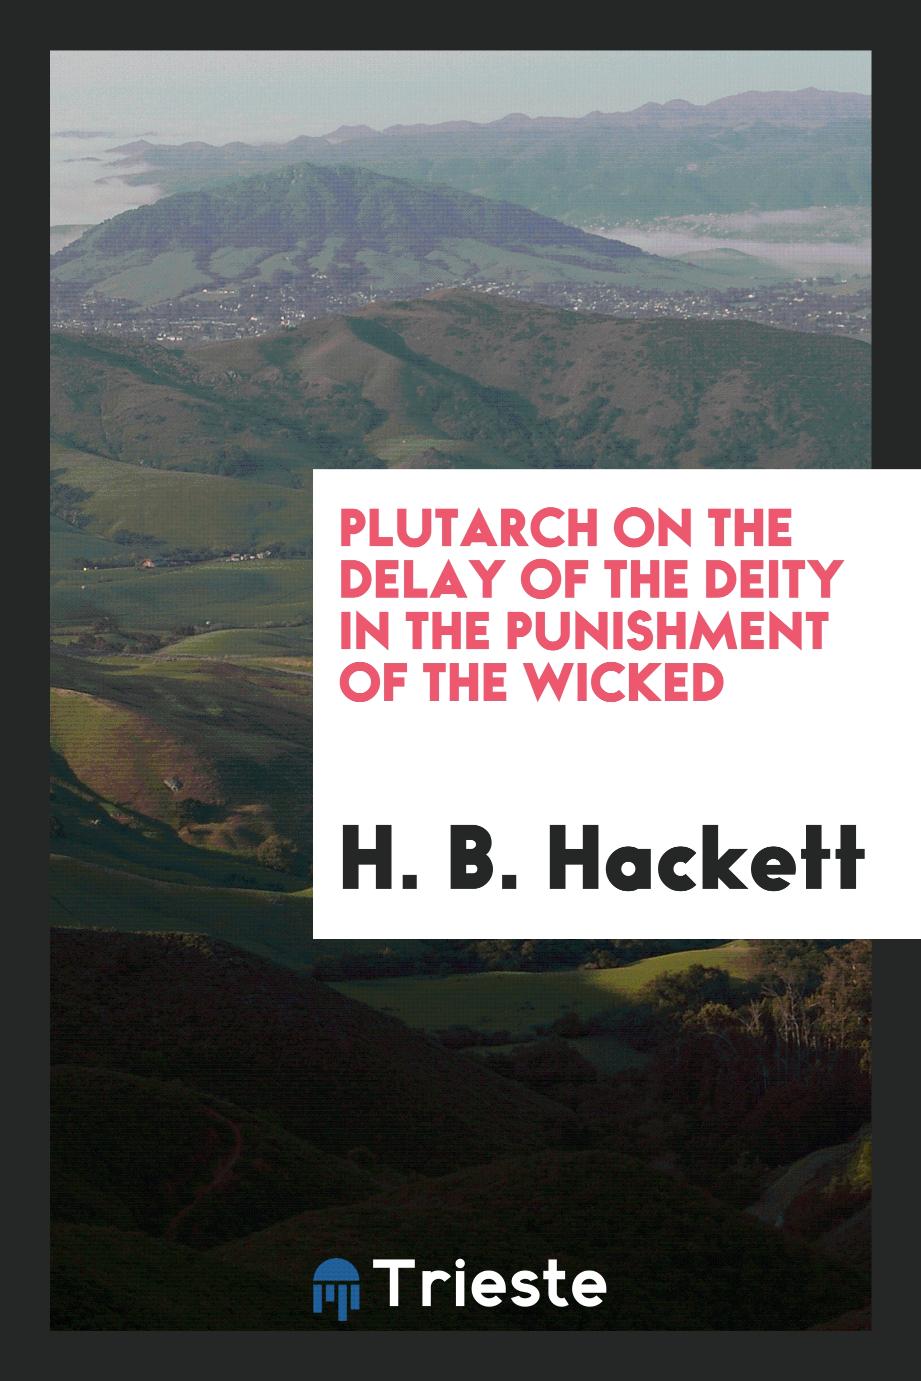 Plutarch on the Delay of the Deity in the Punishment of the Wicked